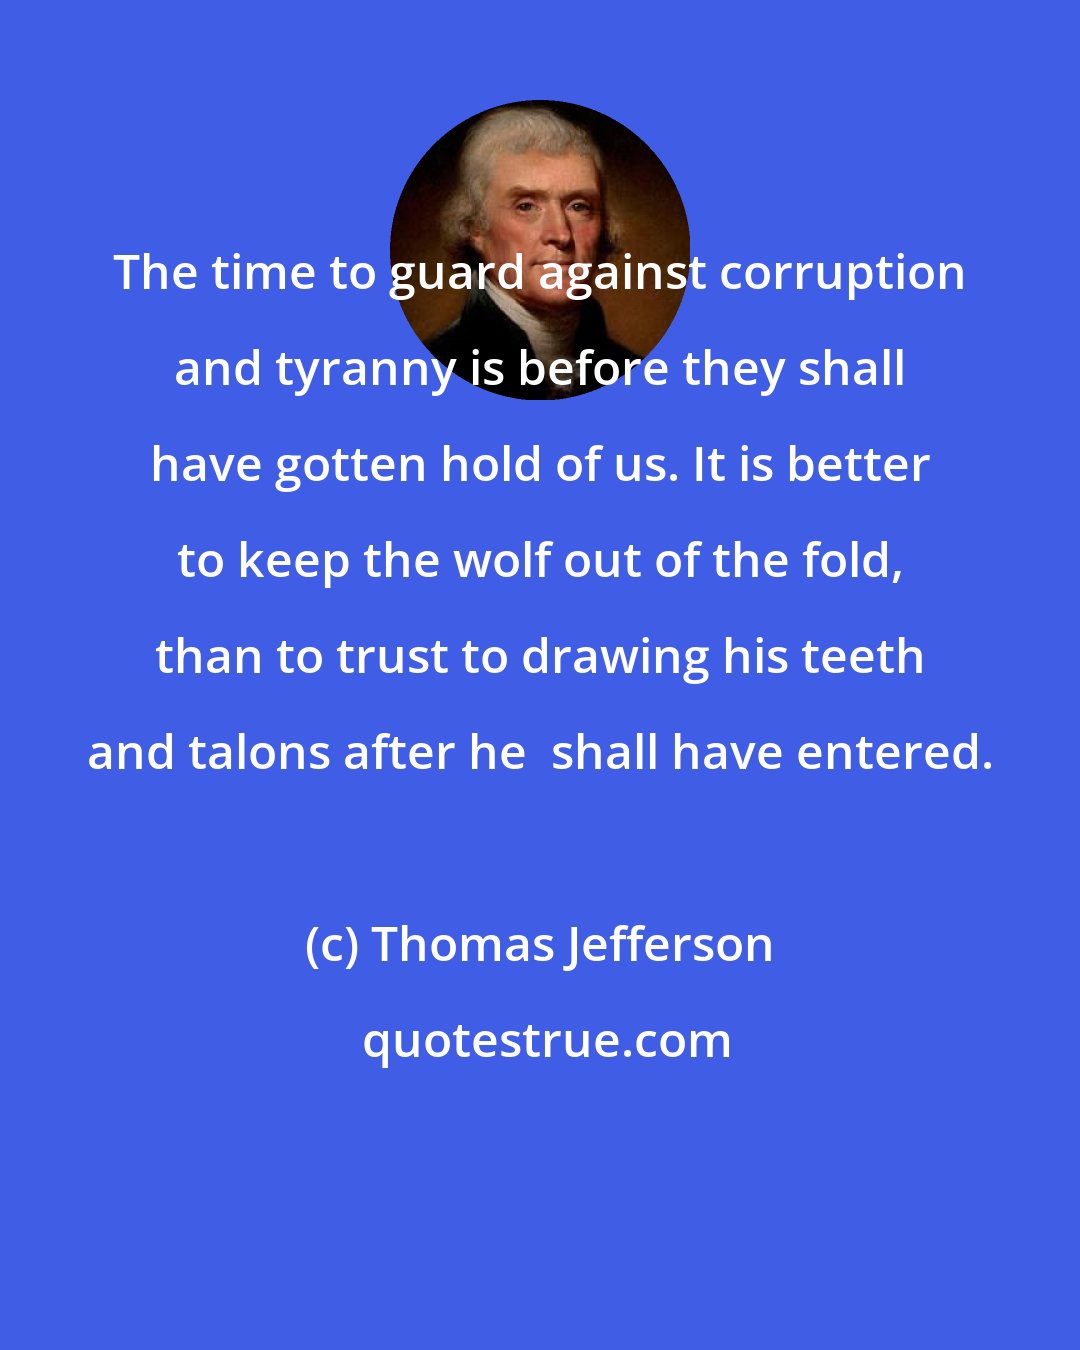 Thomas Jefferson: The time to guard against corruption and tyranny is before they shall have gotten hold of us. It is better to keep the wolf out of the fold, than to trust to drawing his teeth and talons after he  shall have entered.